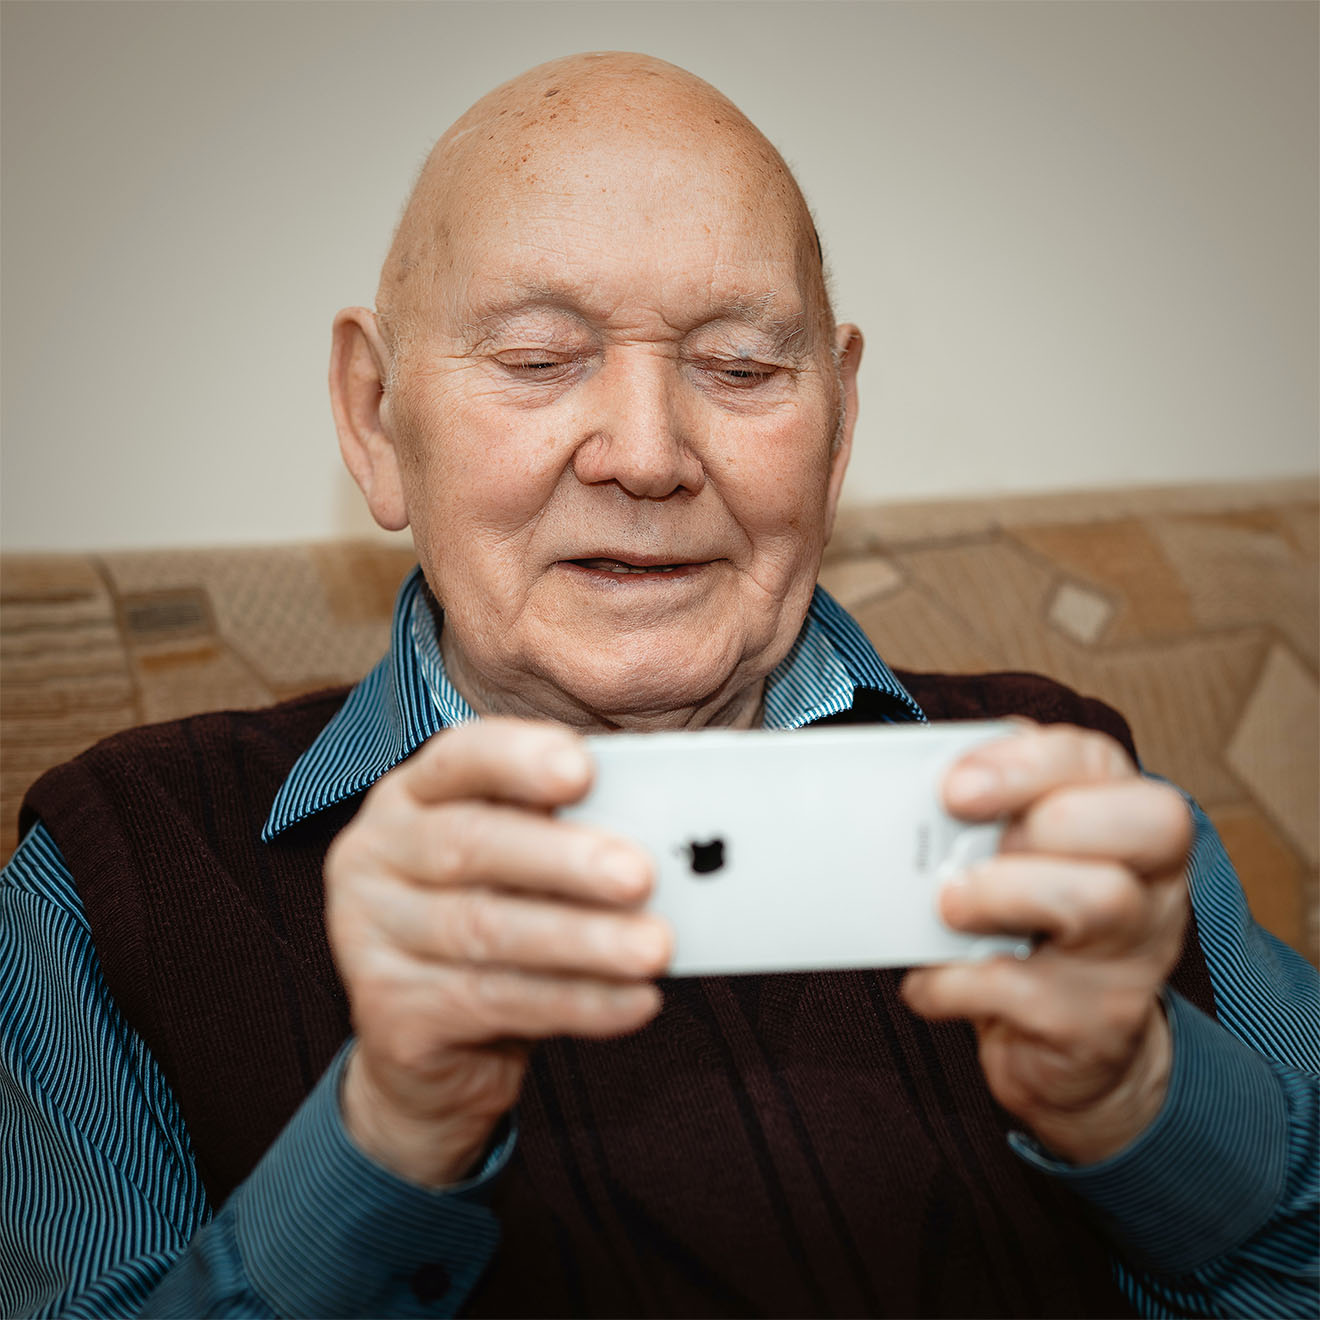 resident playing a game on their phone